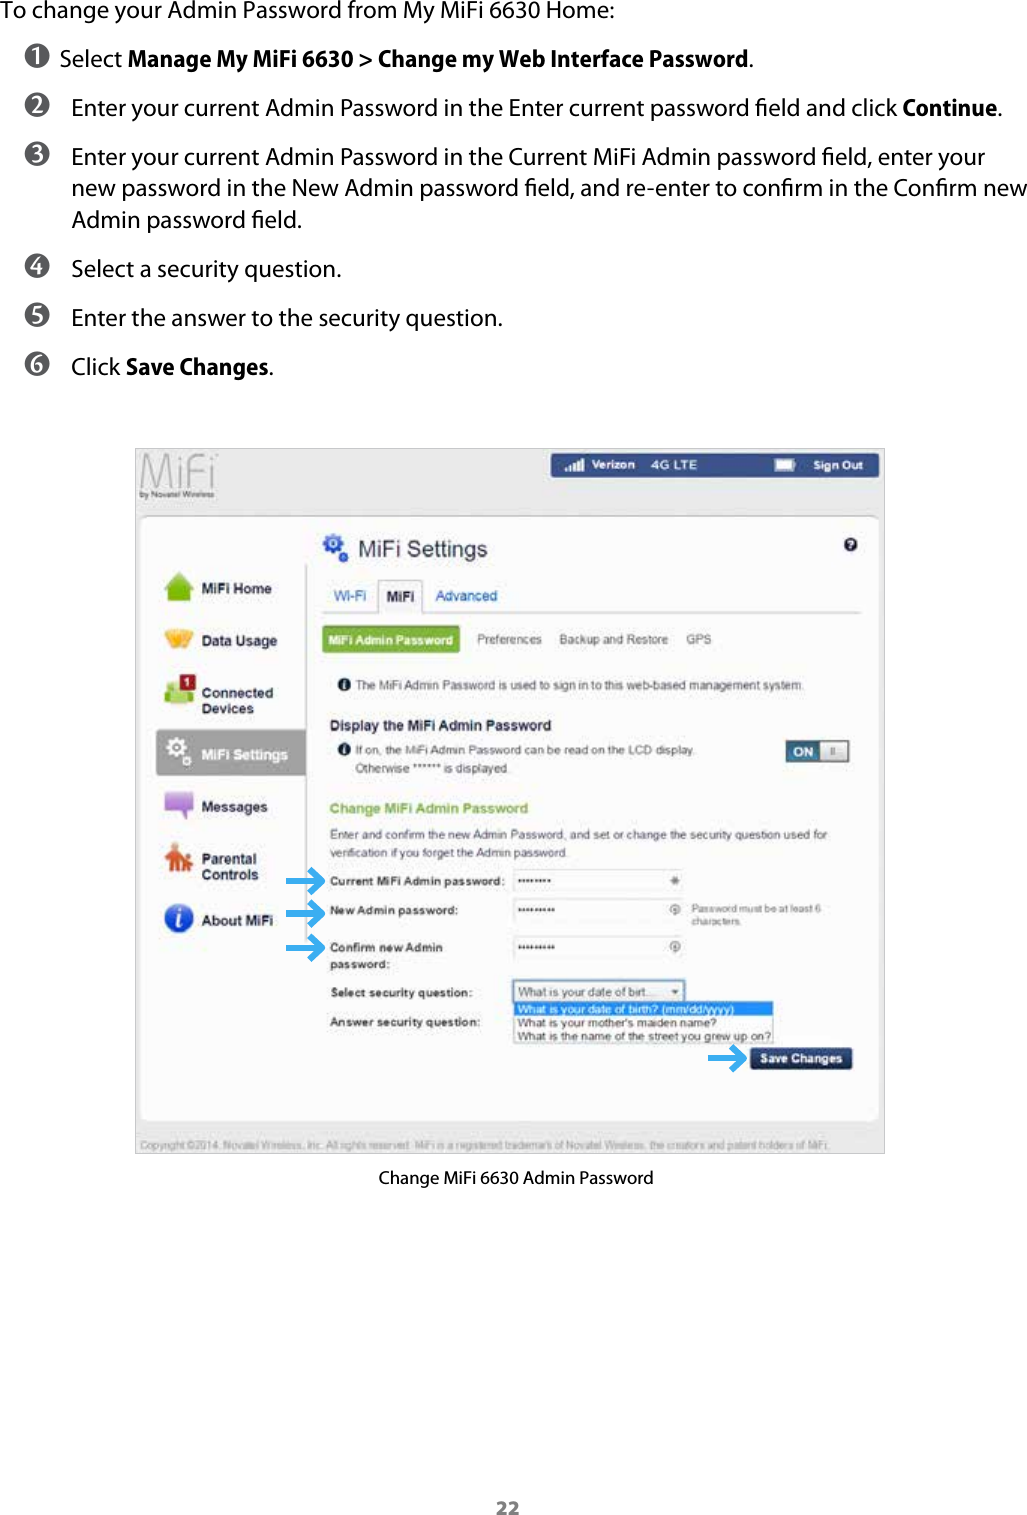 22To change your Admin Password from My MiFi 6630 Home:➊ Select Manage My MiFi 6630 &gt; Change my Web Interface Password. ➋ Enter your current Admin Password in the Enter current password eld and click Continue. ➌ Enter your current Admin Password in the Current MiFi Admin password eld, enter your new password in the New Admin password eld, and re-enter to conrm in the Conrm new Admin password eld. ➍ Select a security question. ➎ Enter the answer to the security question. ➏ Click Save Changes.Change MiFi 6630 Admin Password